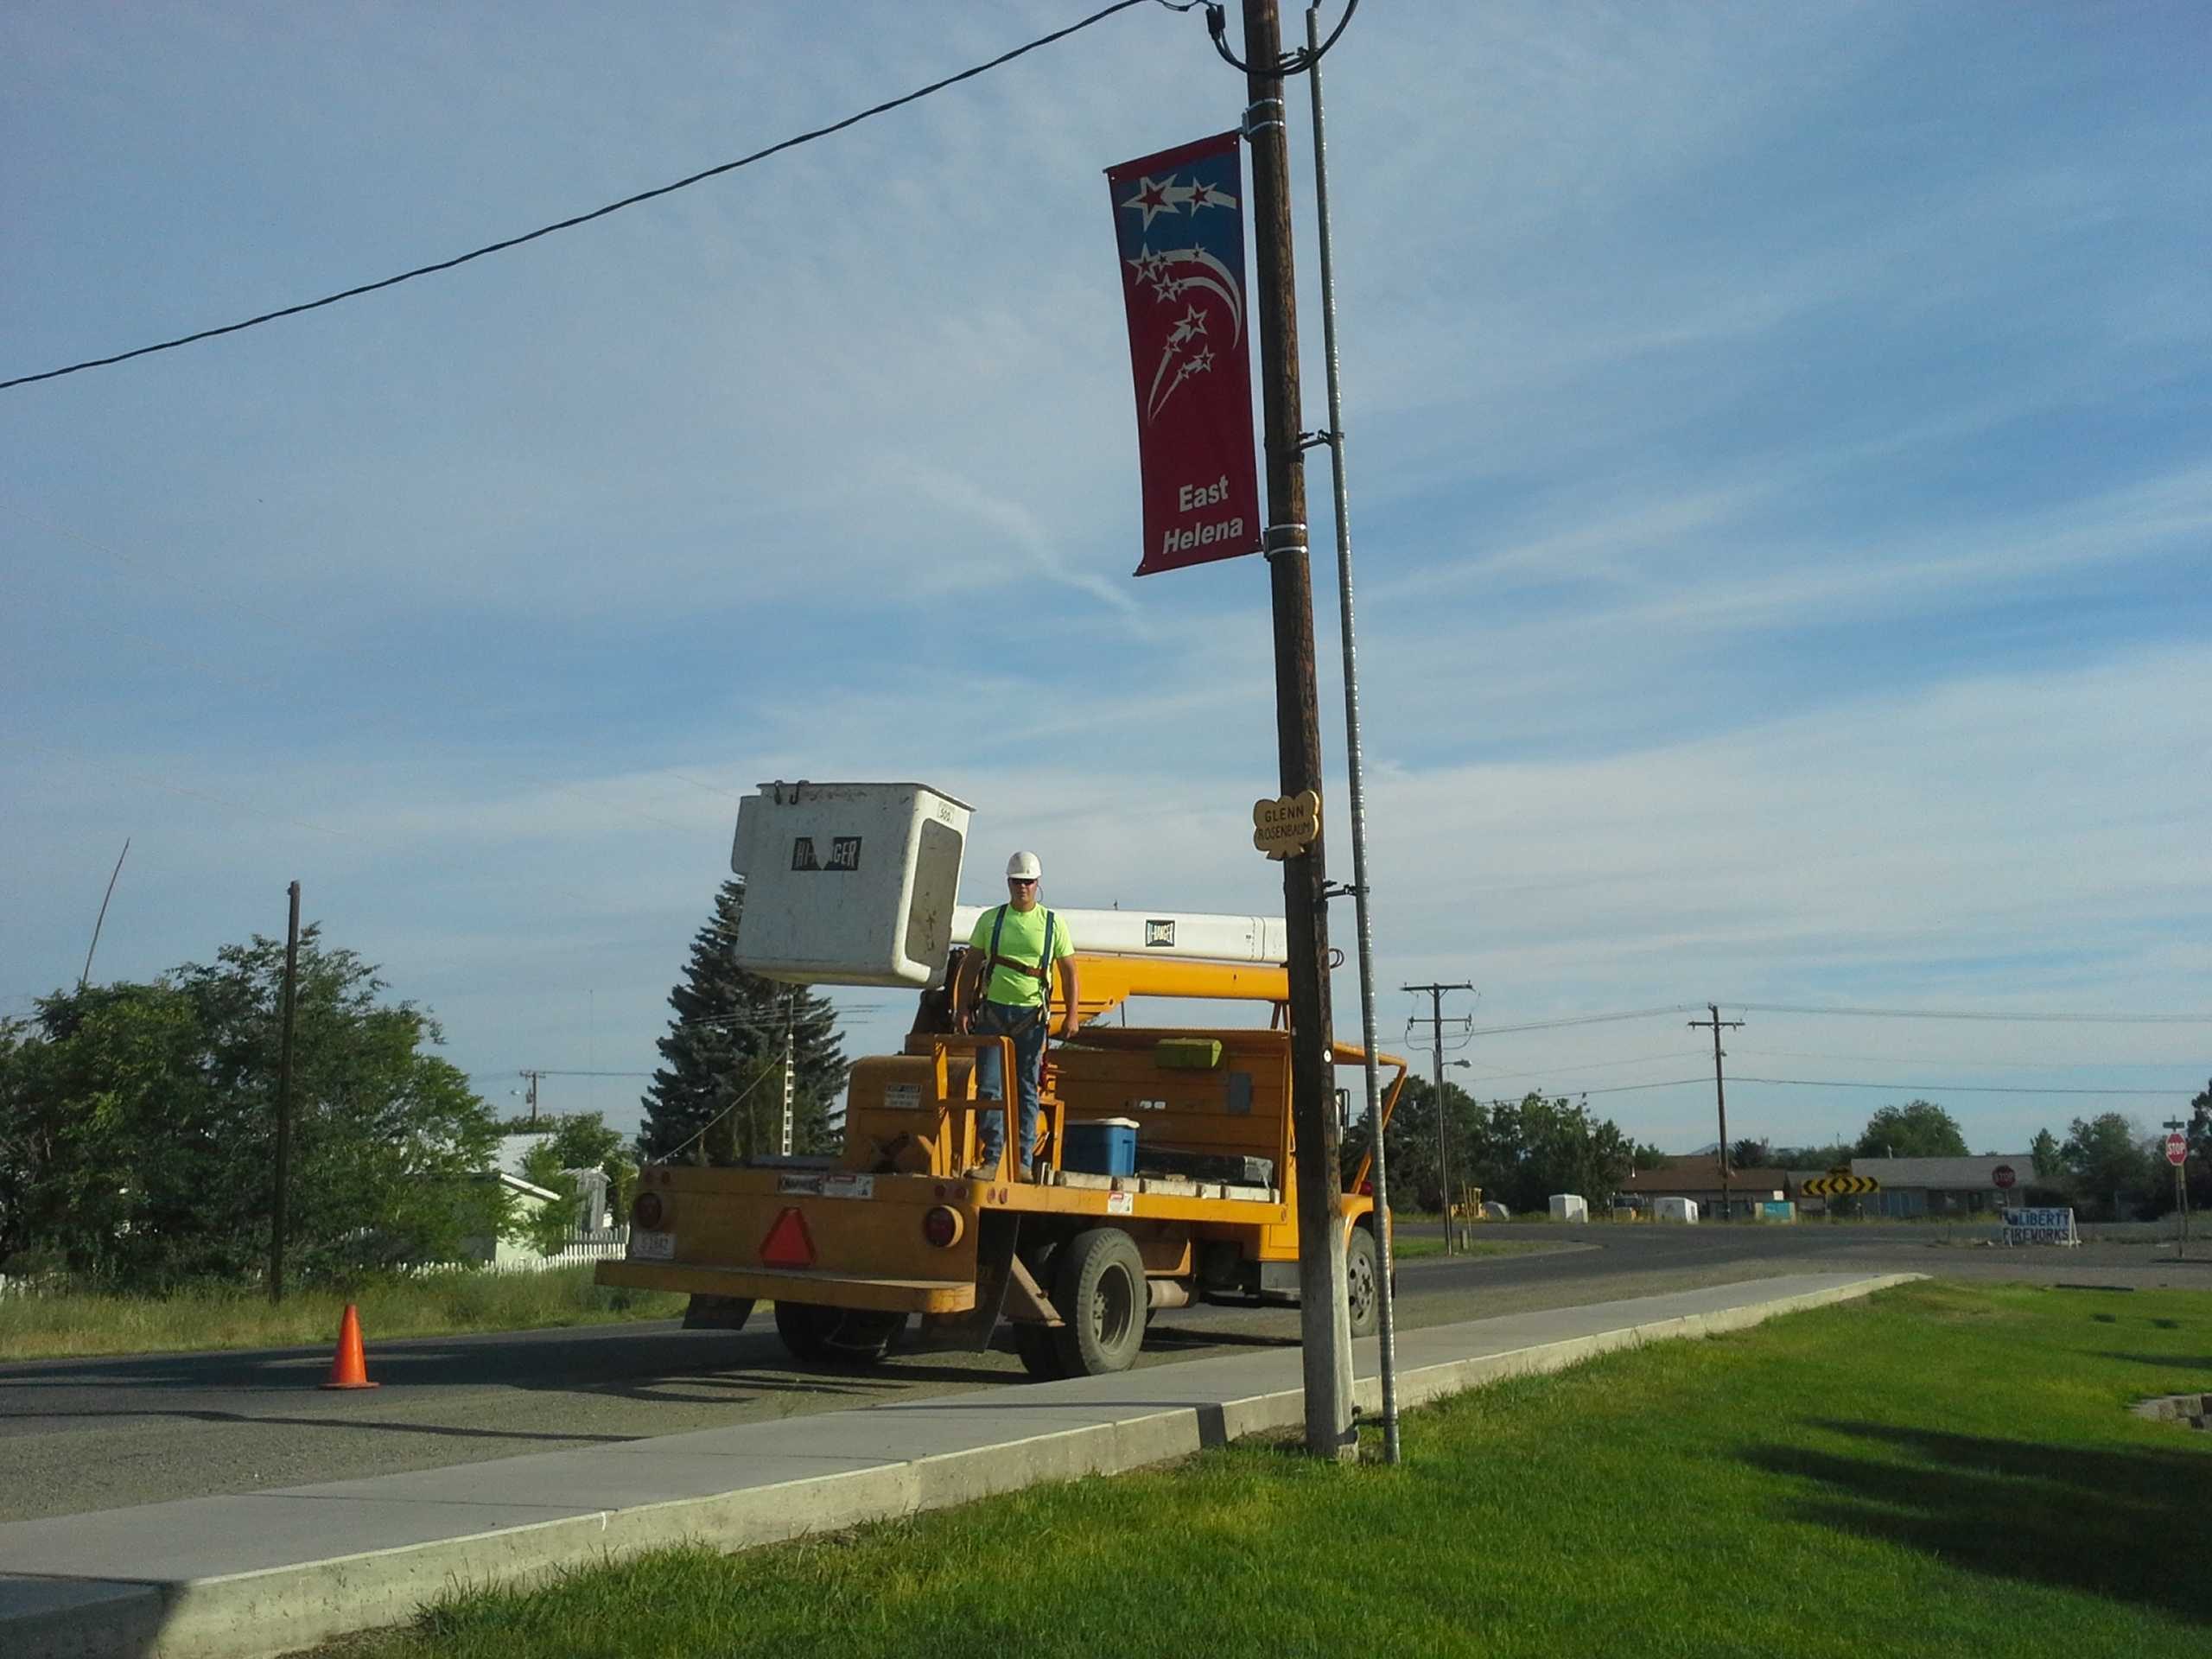 East Helena Public Works lift truck with employee getting ready to change a street banner.